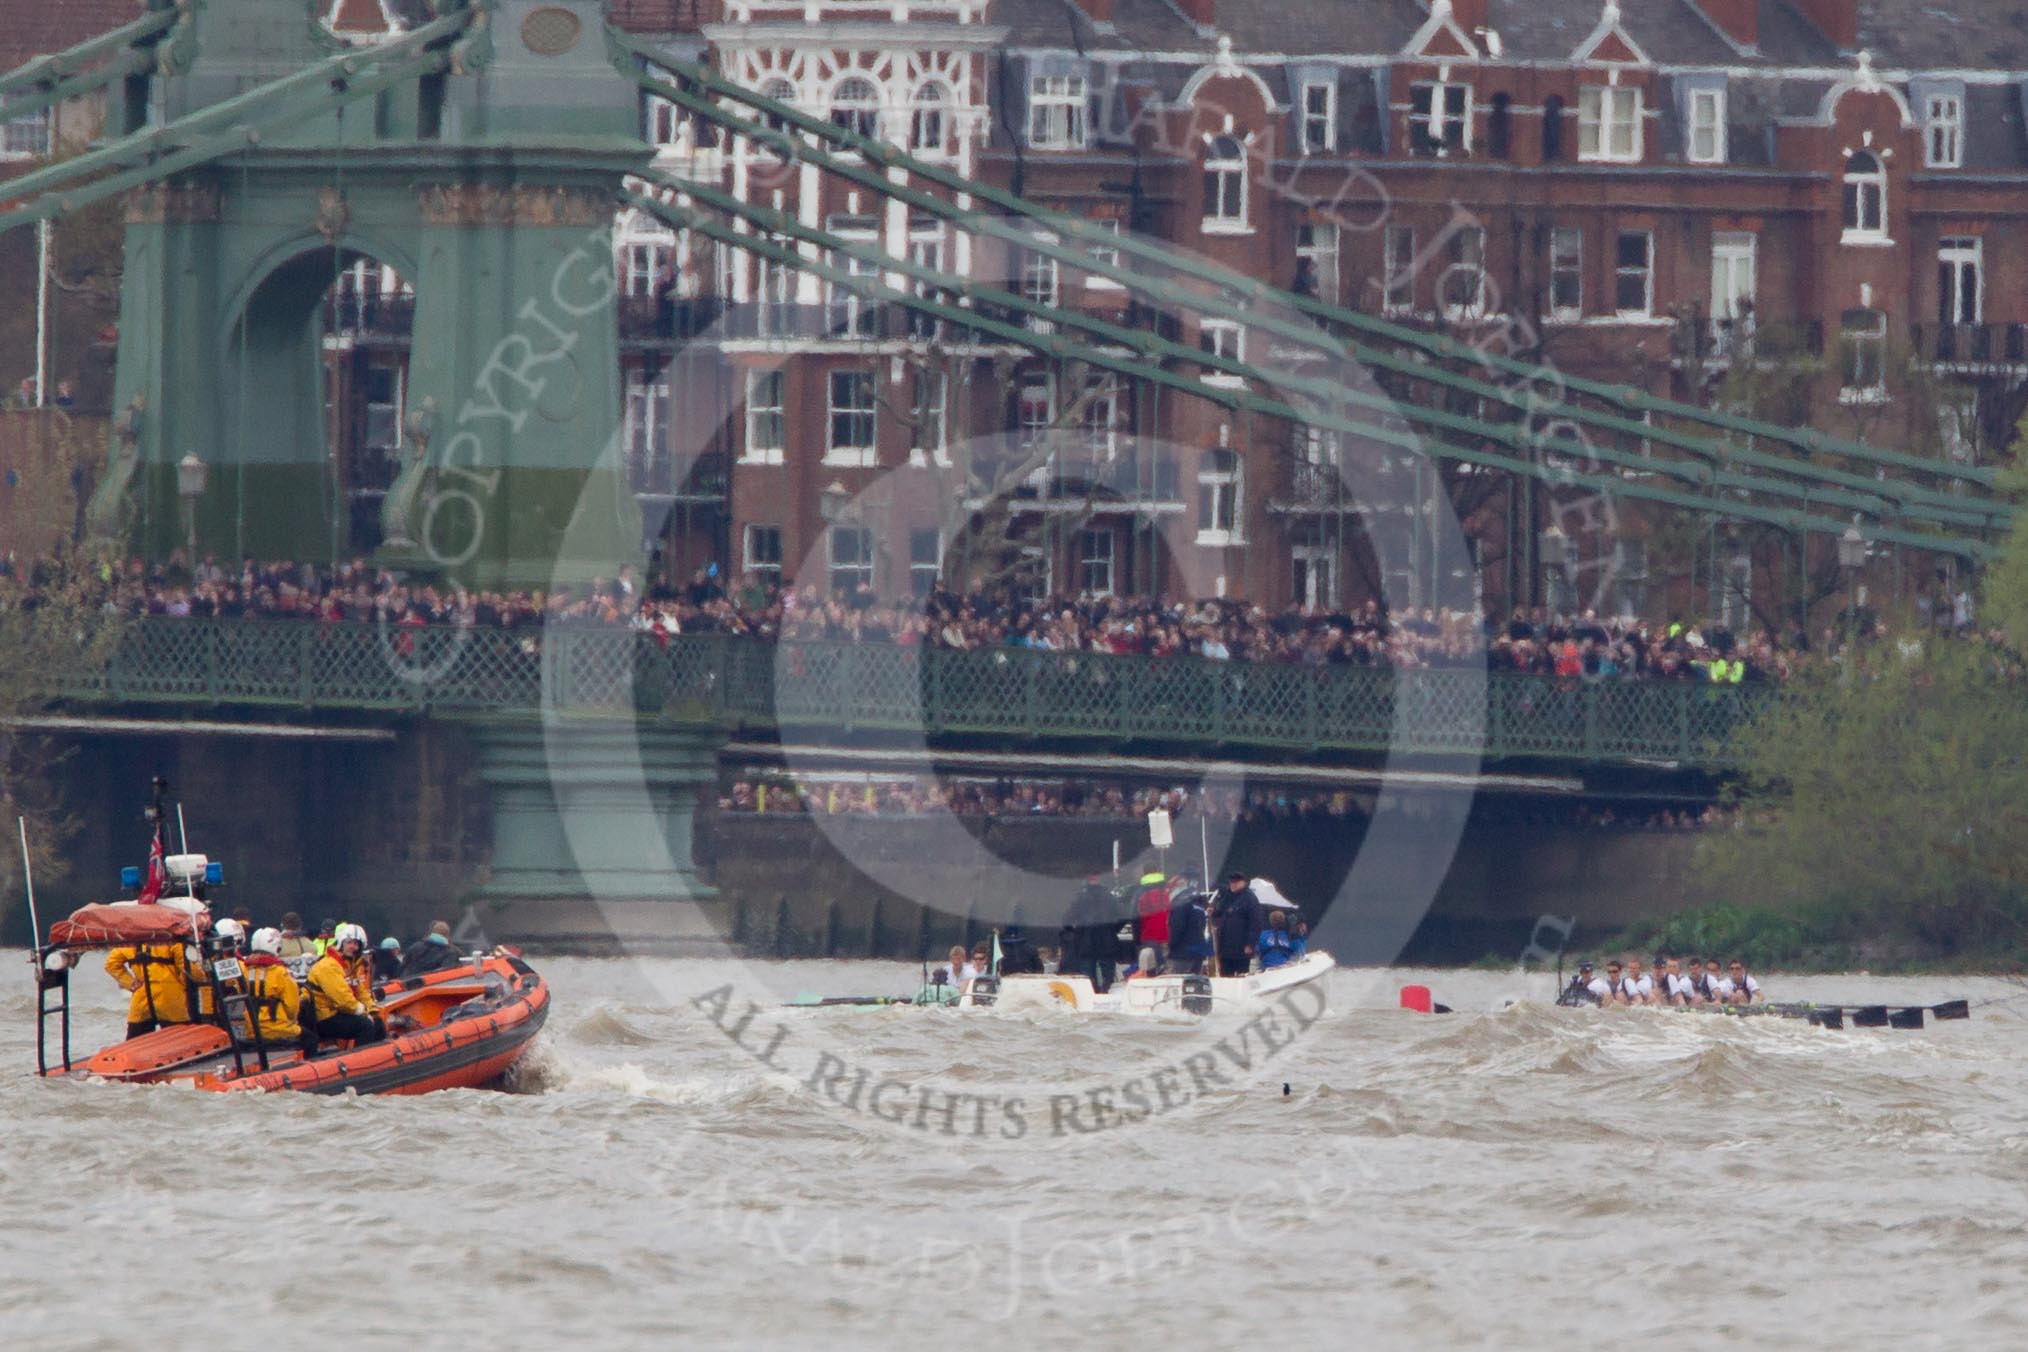 The Boat Race 2012: The 2012 Boat Race, with the boats approaching Hammersmith Bridge: The Cambridge Blue Boat on the left, nearly covered by the boat of the umpire, and the Oxford Blue Boat on the right..




on 07 April 2012 at 14:20, image #301